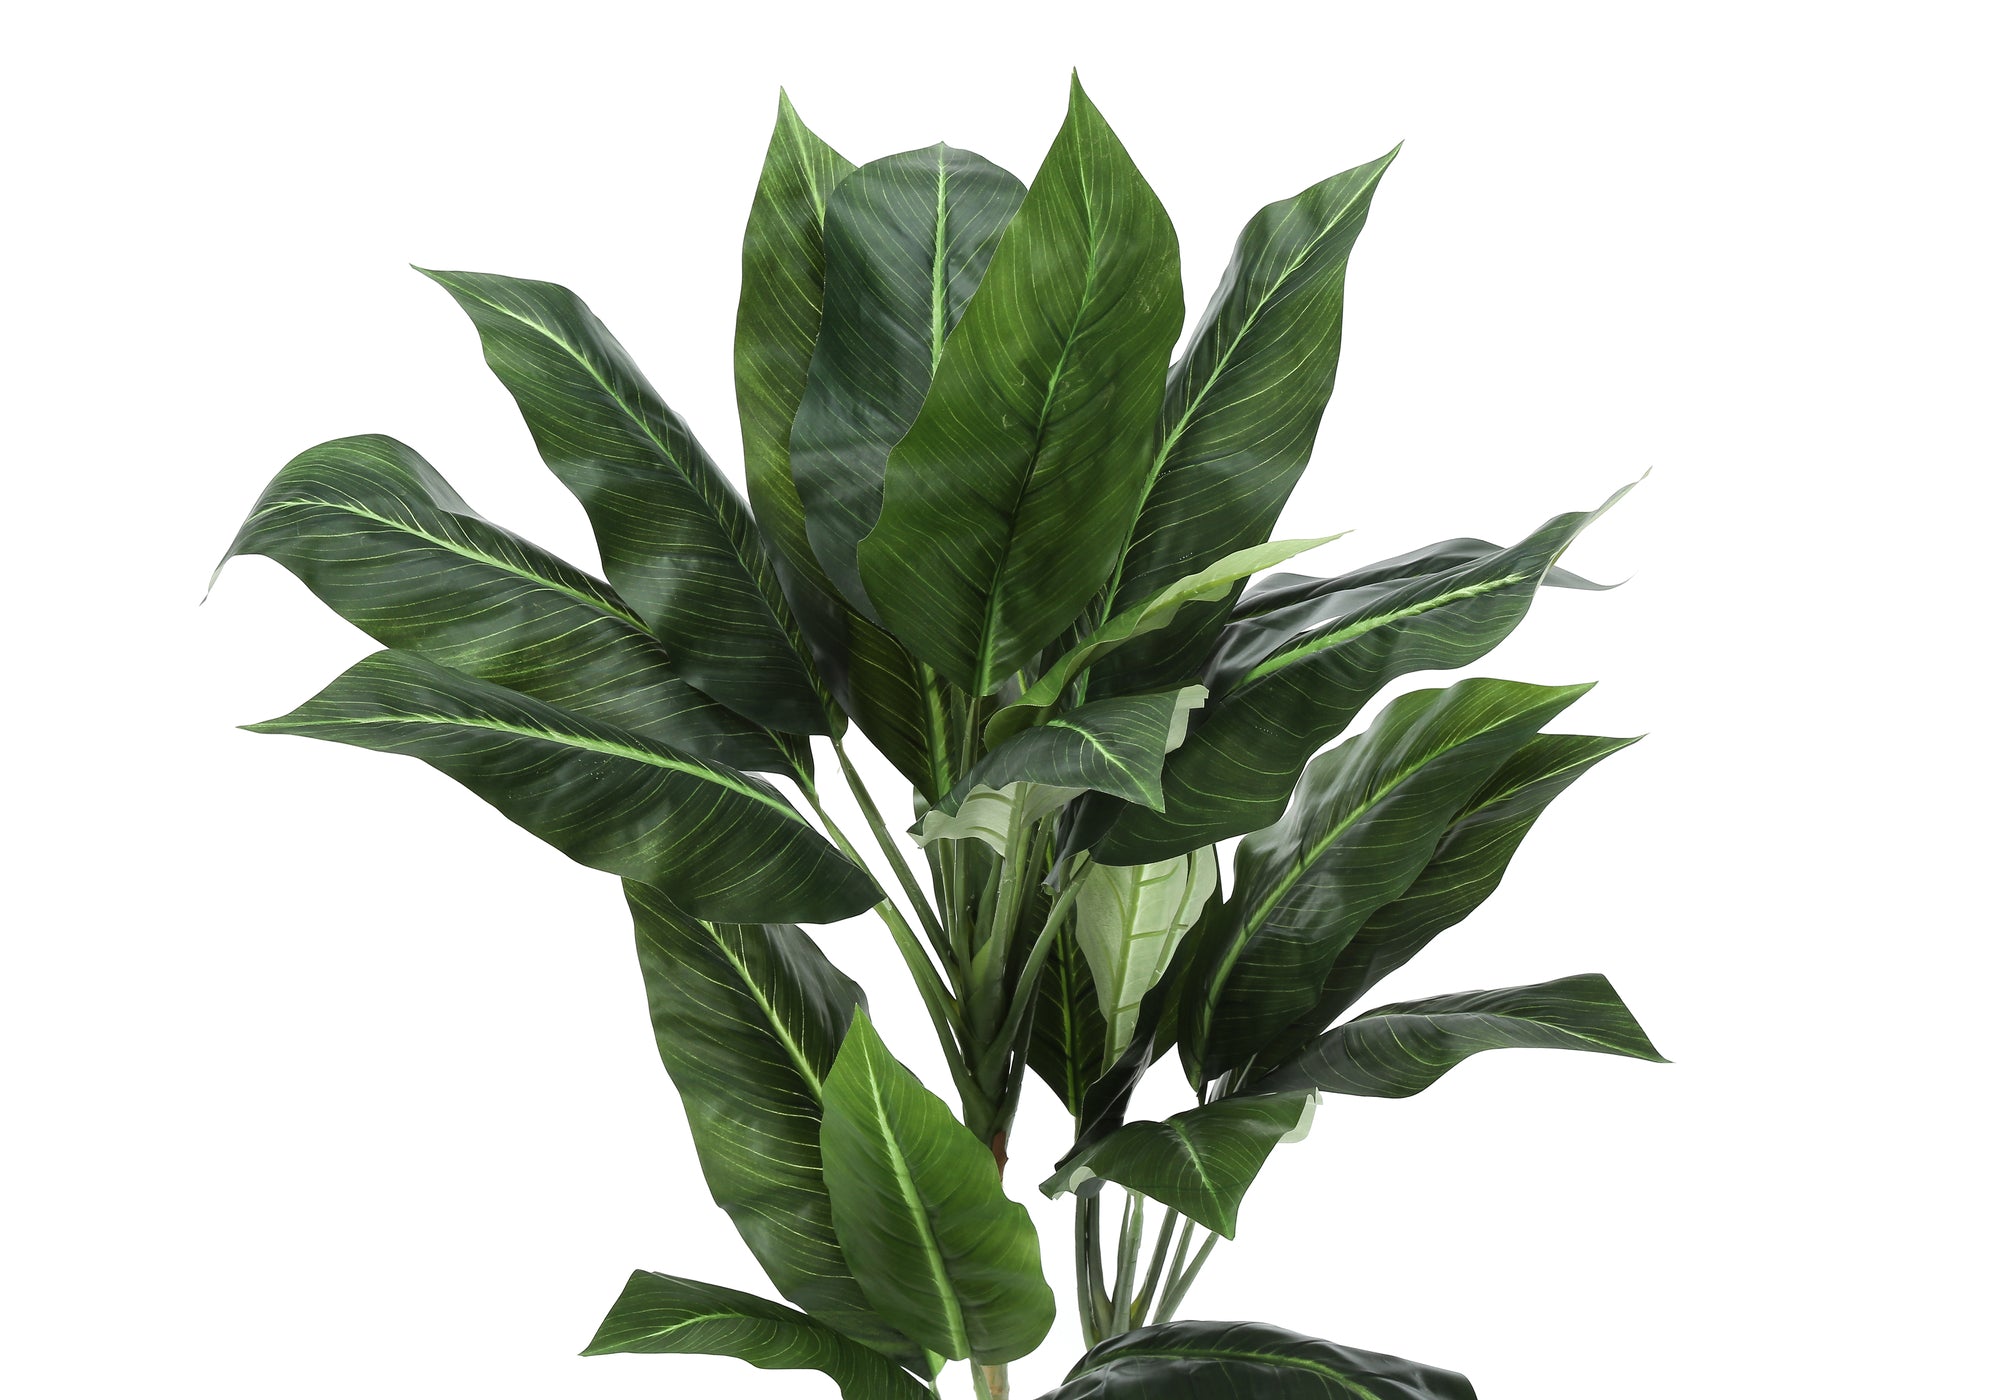 MN-339512    Artificial Plant, 42" Tall, Evergreen Tree, Indoor, Faux, Fake, Floor, Greenery, Potted, Decorative, Green Leaves, Black Pot